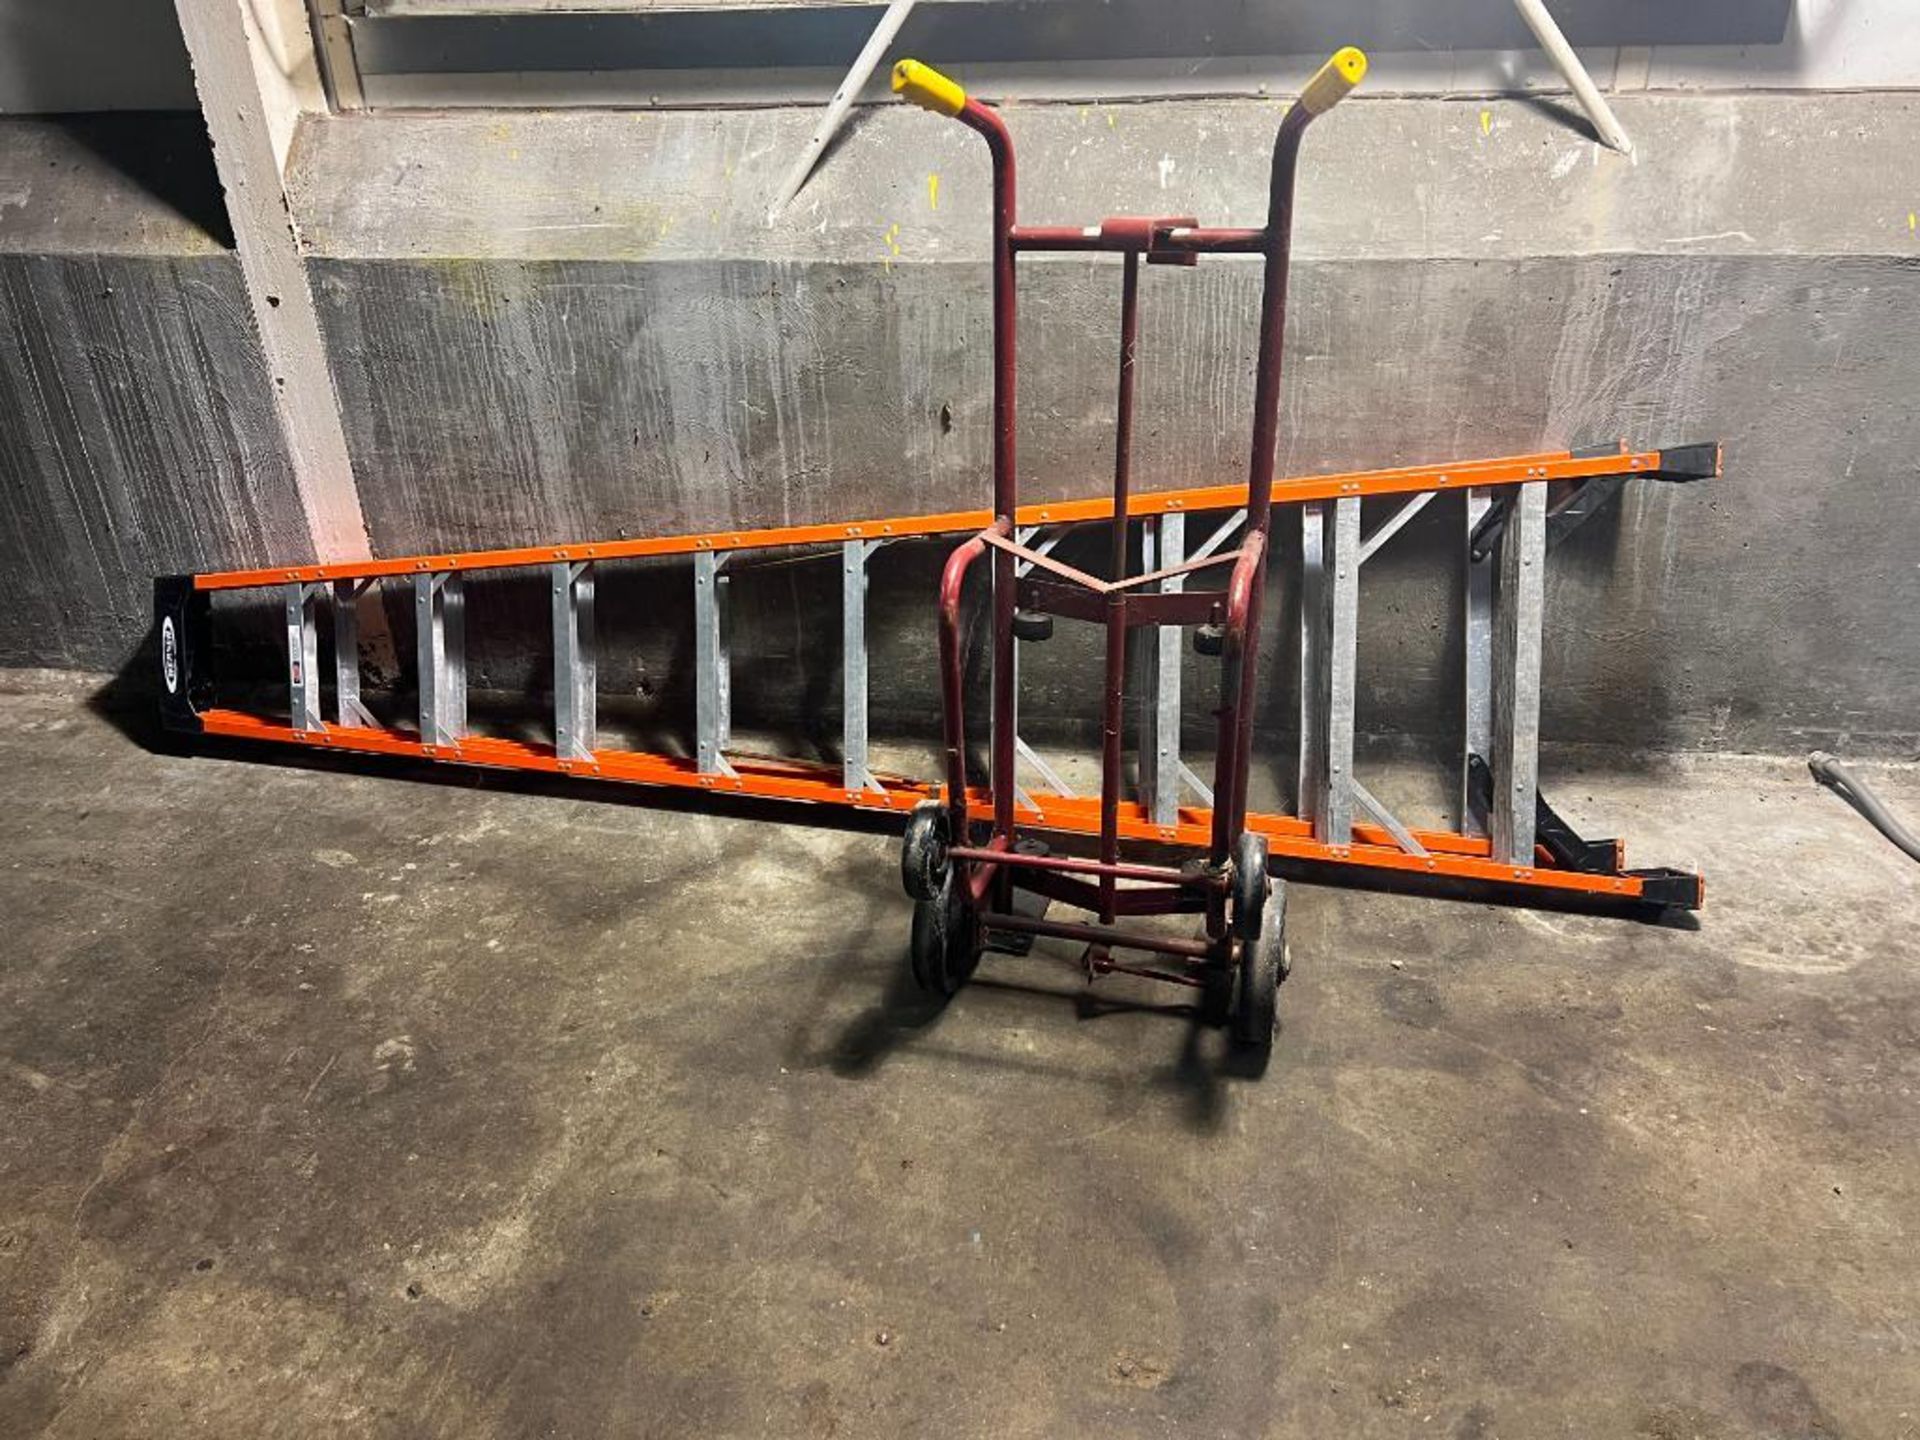 Assorted Ladders, Mobile Stairs and Barrel Dollies - Rigging Fee: $75 - Image 2 of 2